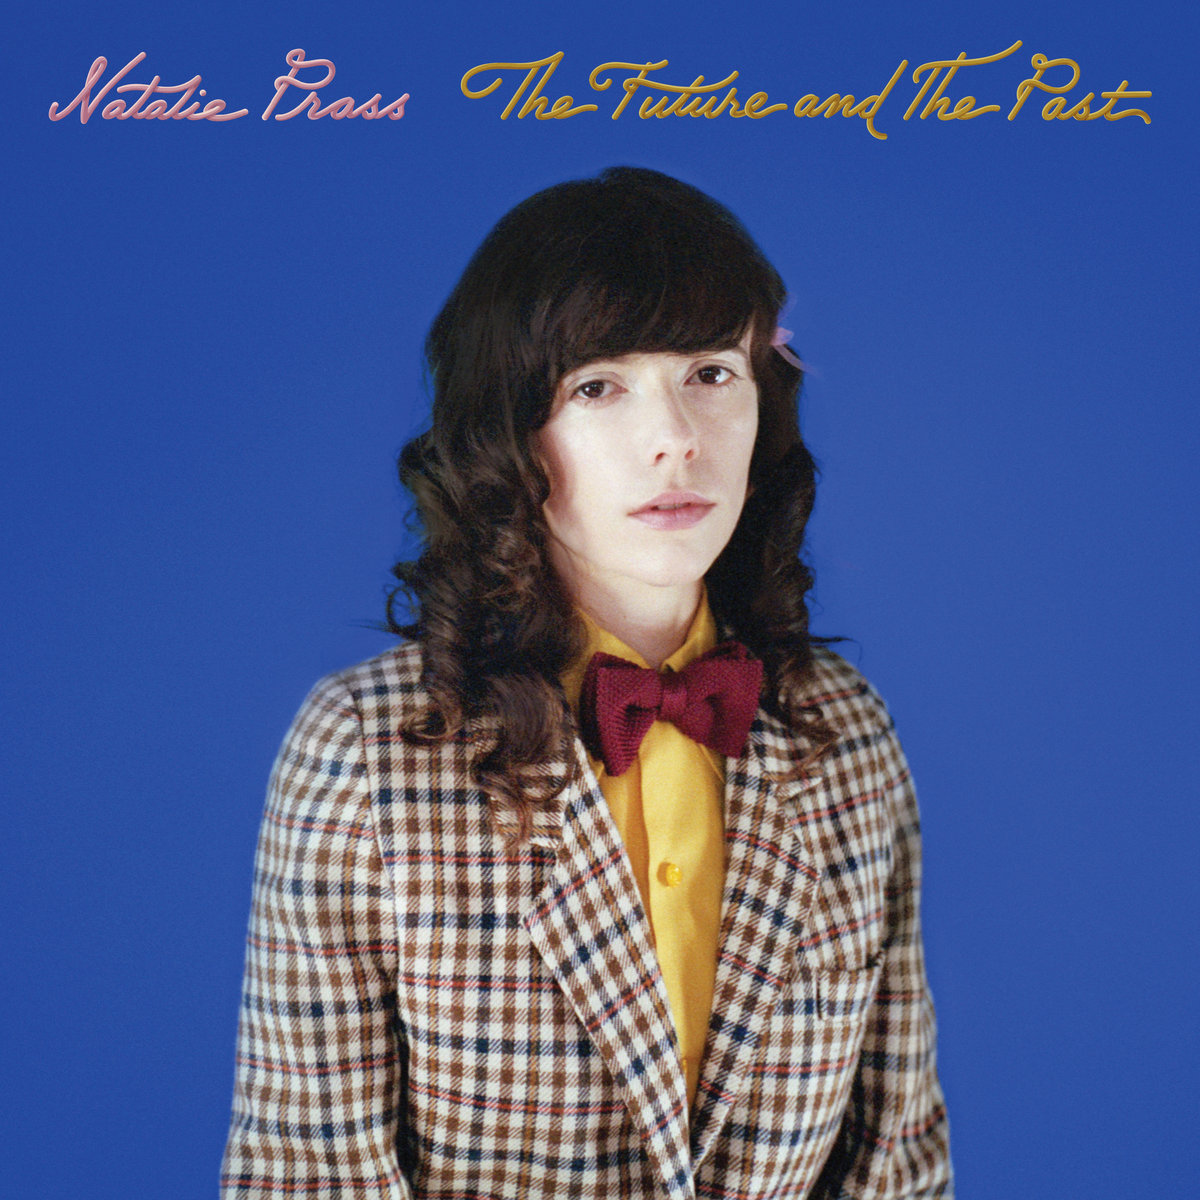 Natalie Prass - The Future and The Past (ATO Records)